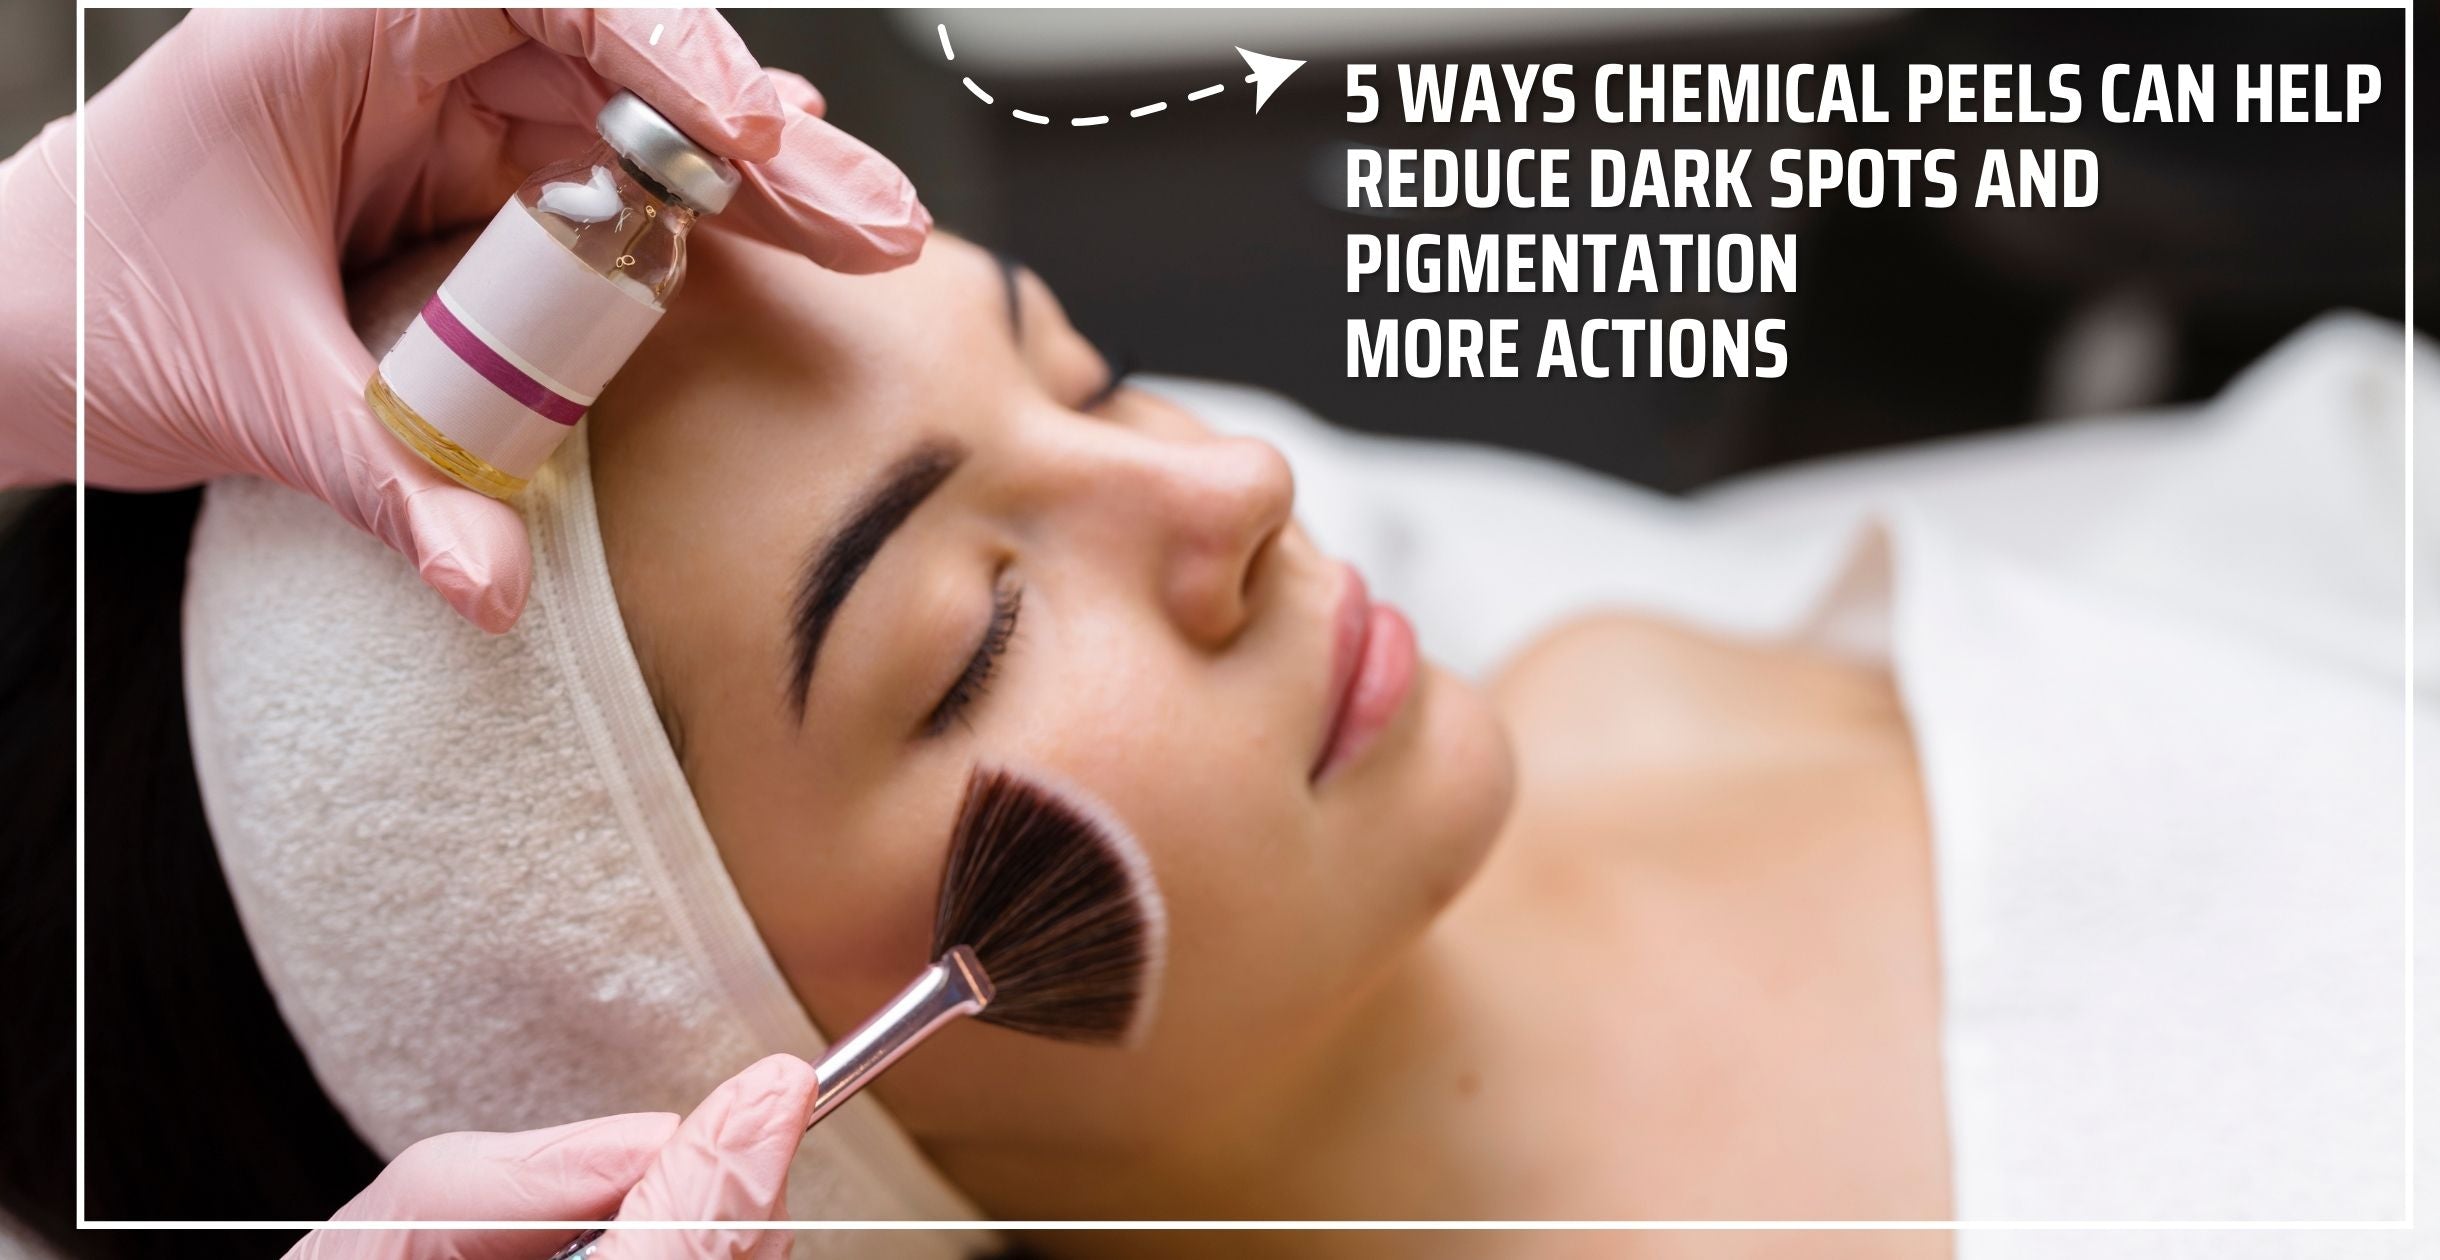 5 Ways Chemical Peels Can Help Reduce Dark Spots and Pigmentation